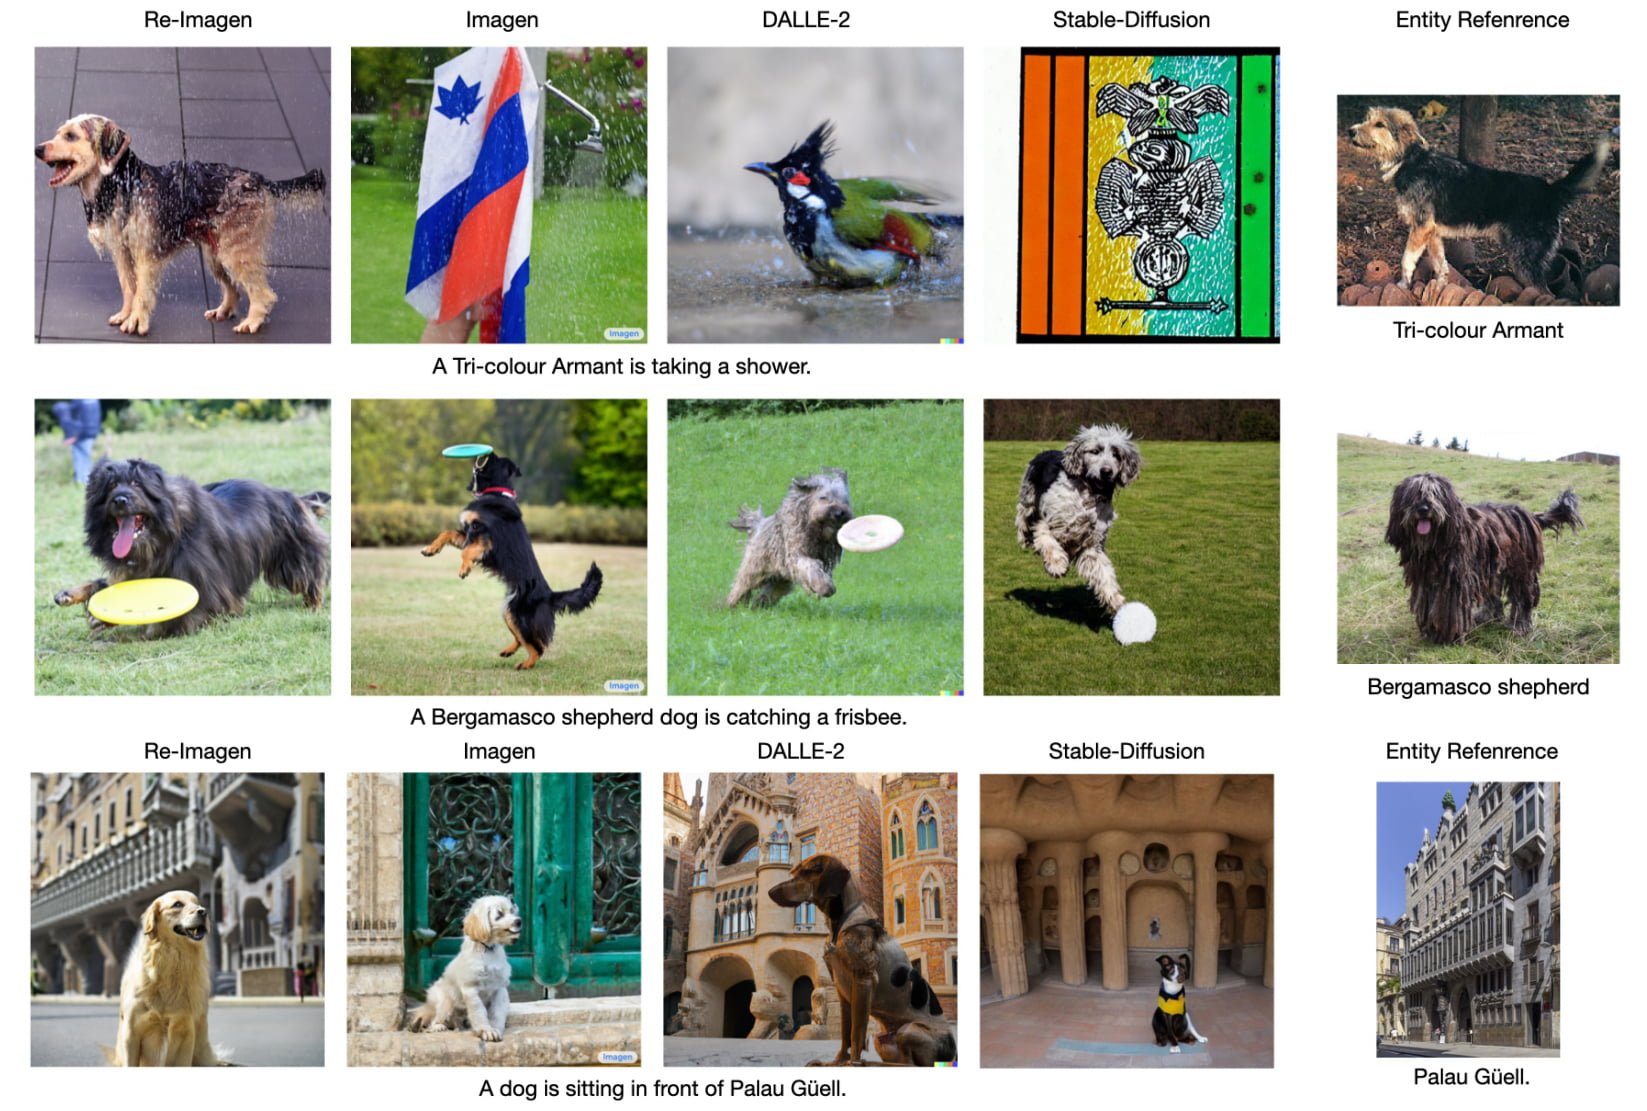 Google’s Re-Imagen could set new quality standards for AI images